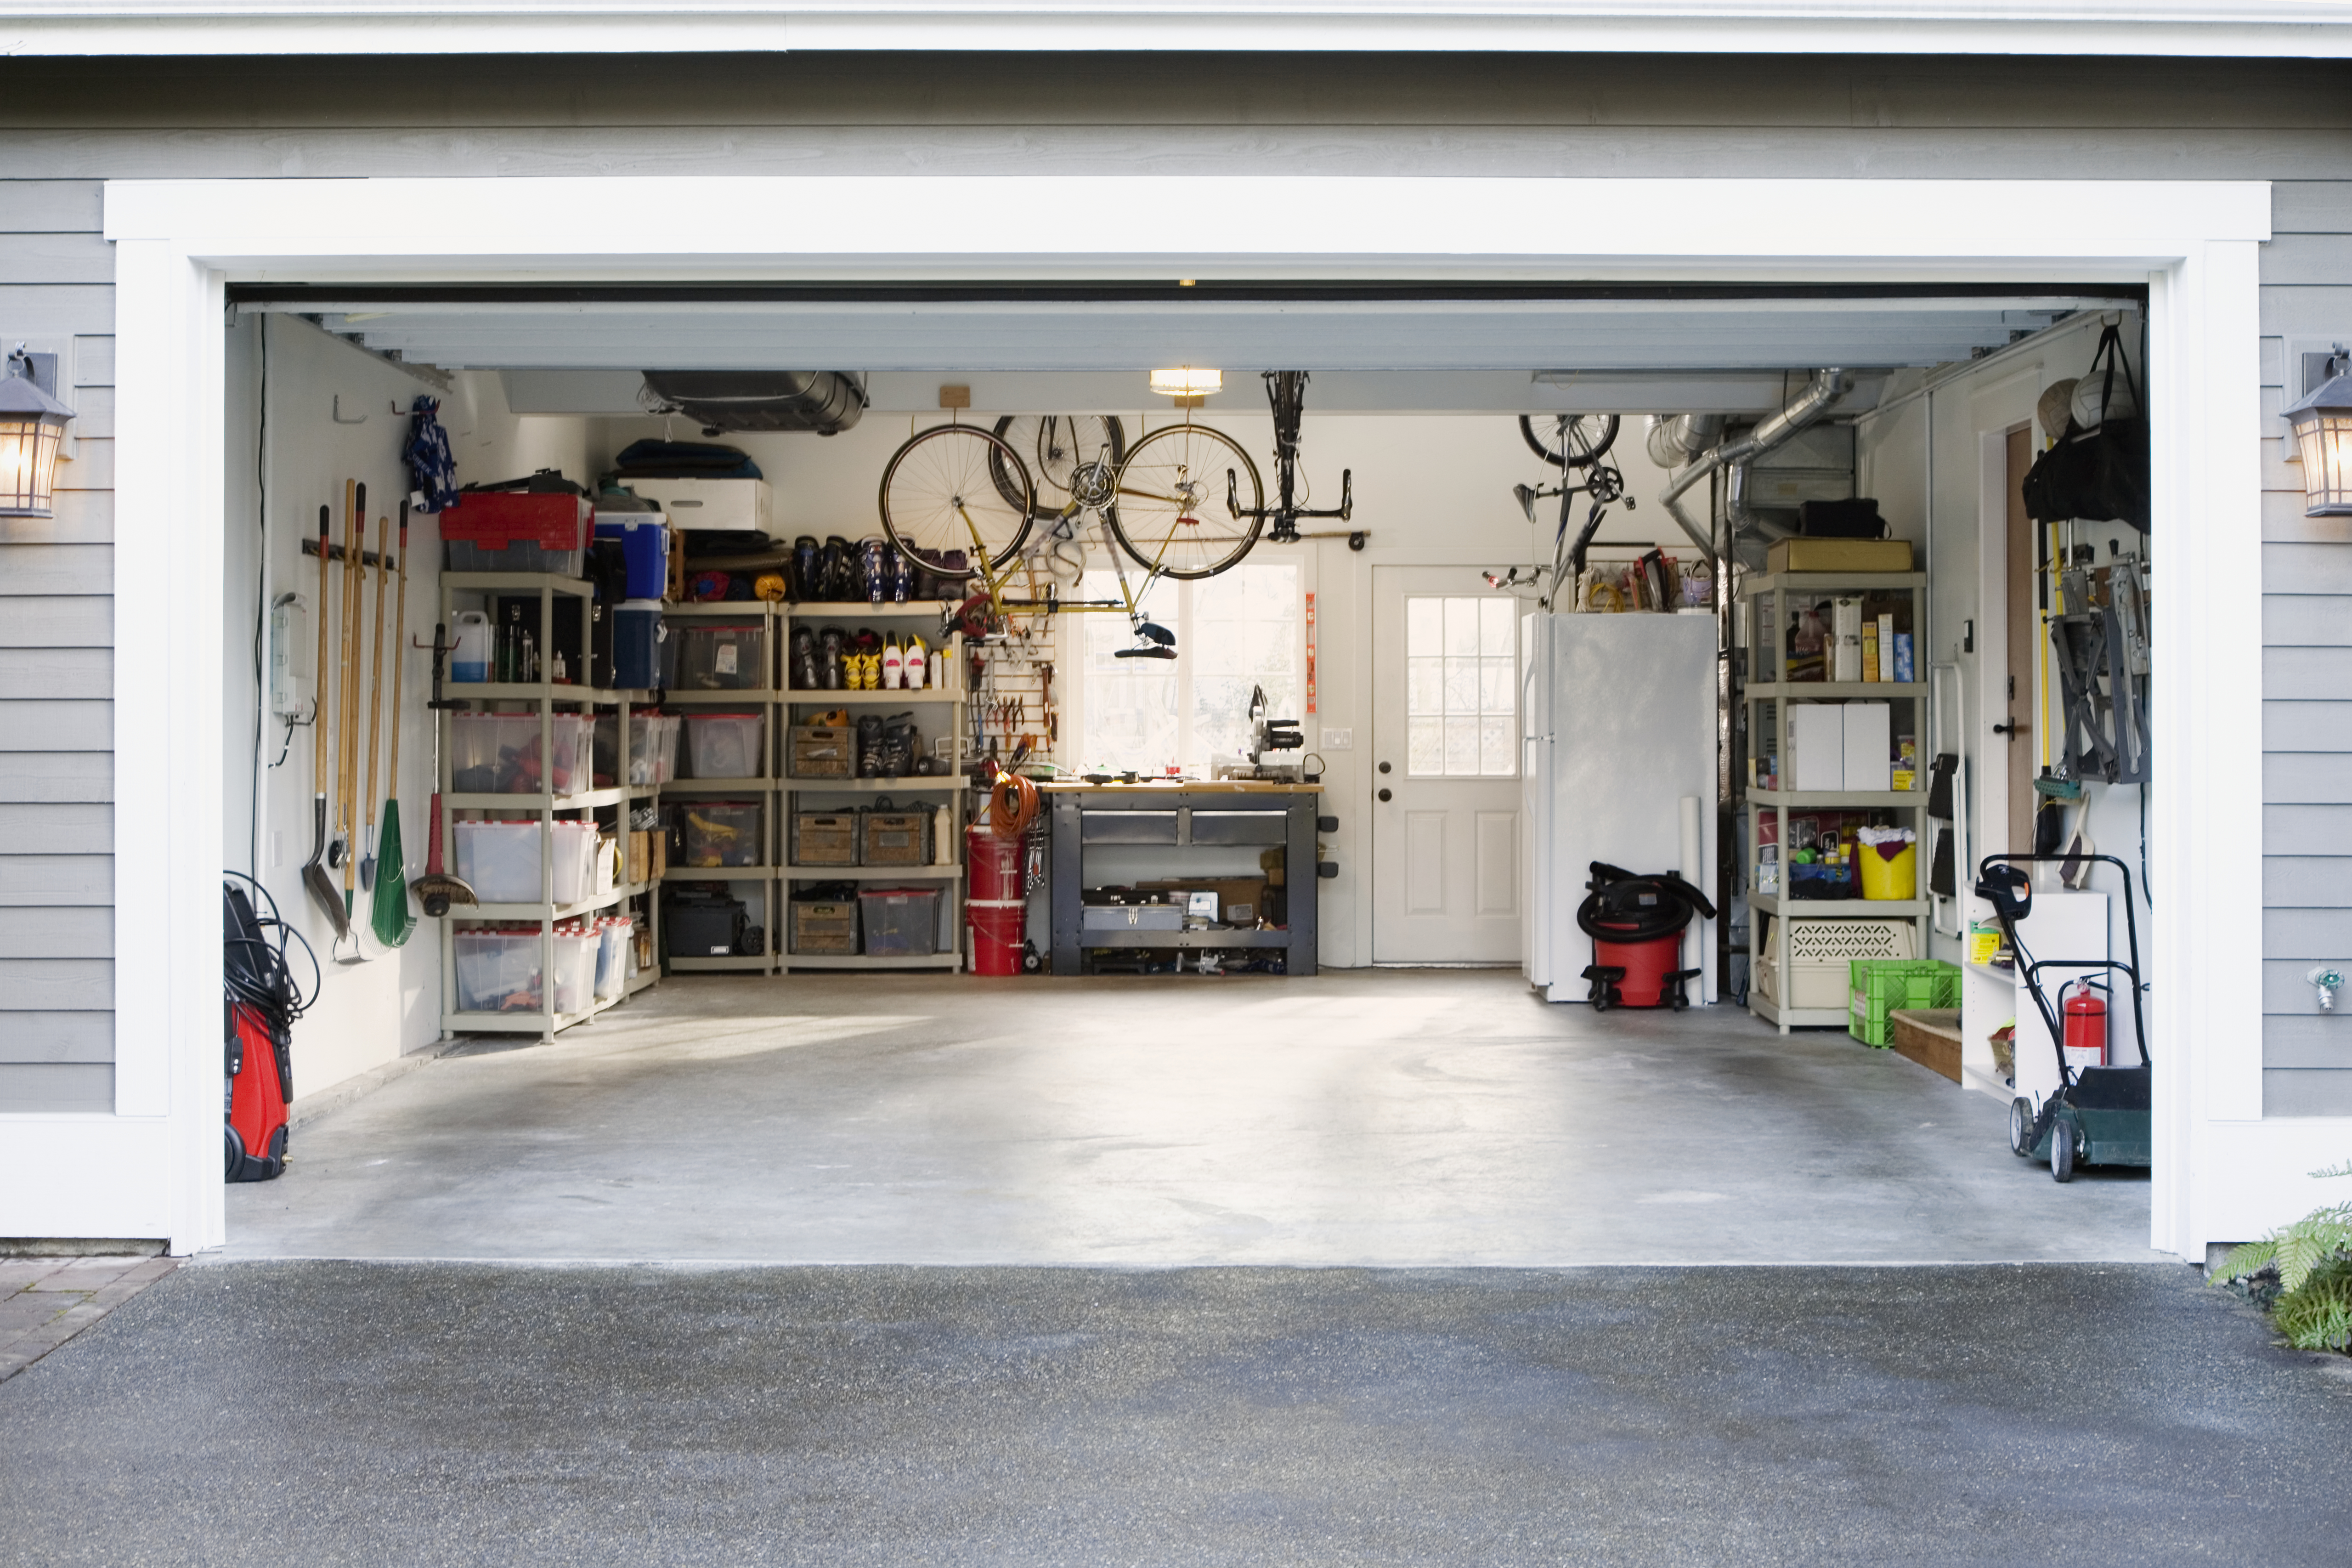 An open garage | Source: Getty Images